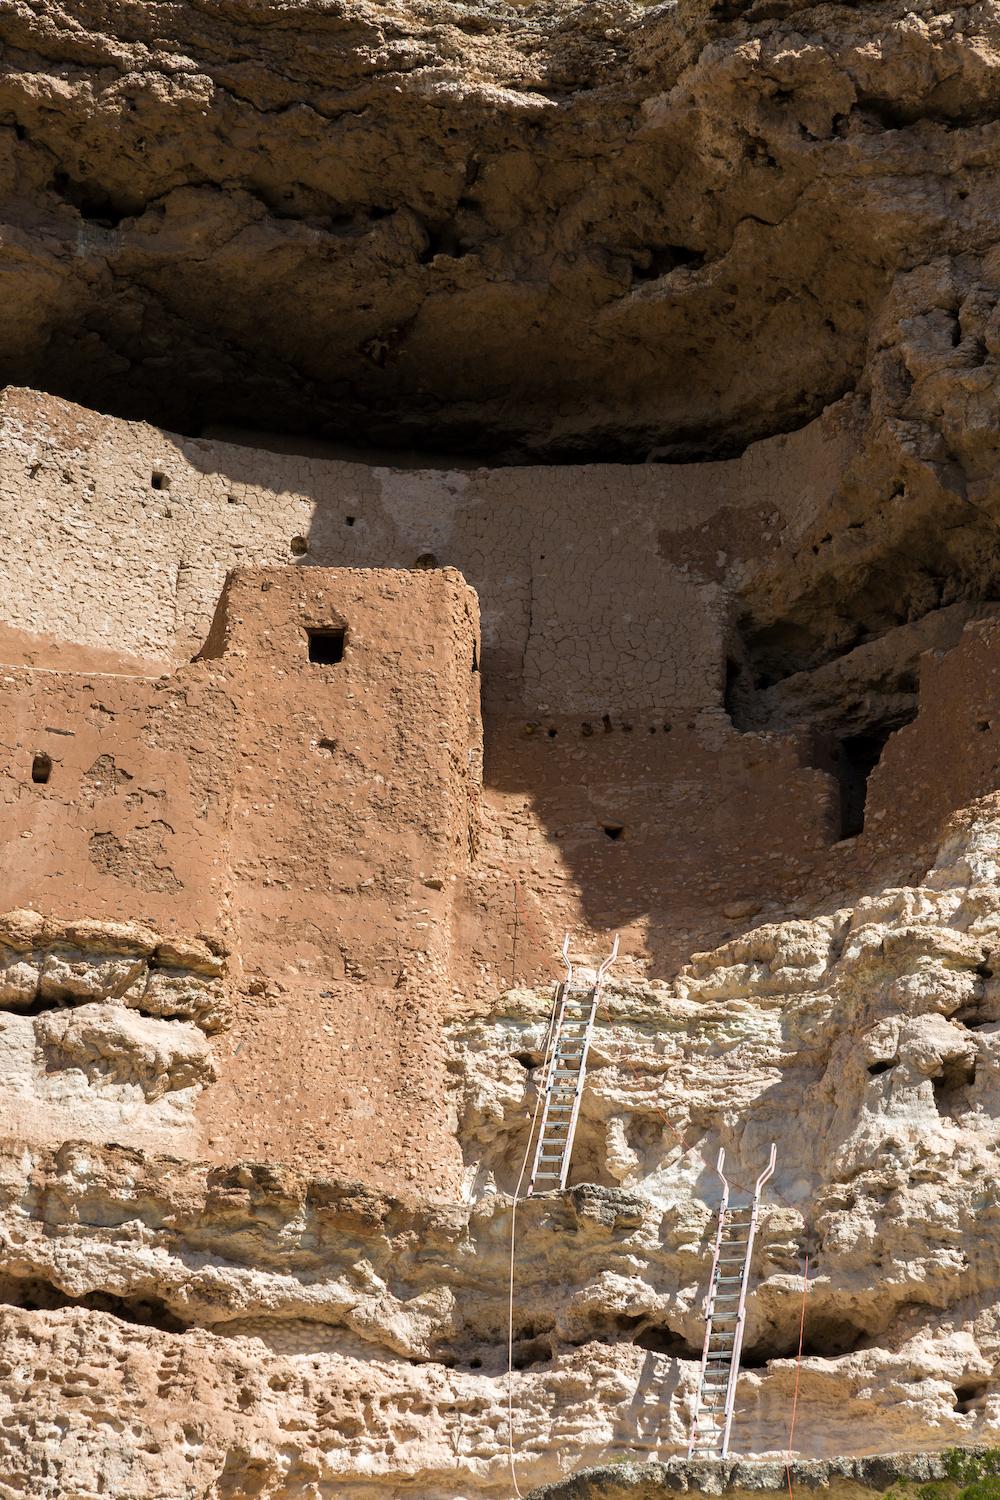 Access to Montezuma Castle today is restricted so as to preserve the limestone cliffside. (Jon Manjeot/Shutterstock)